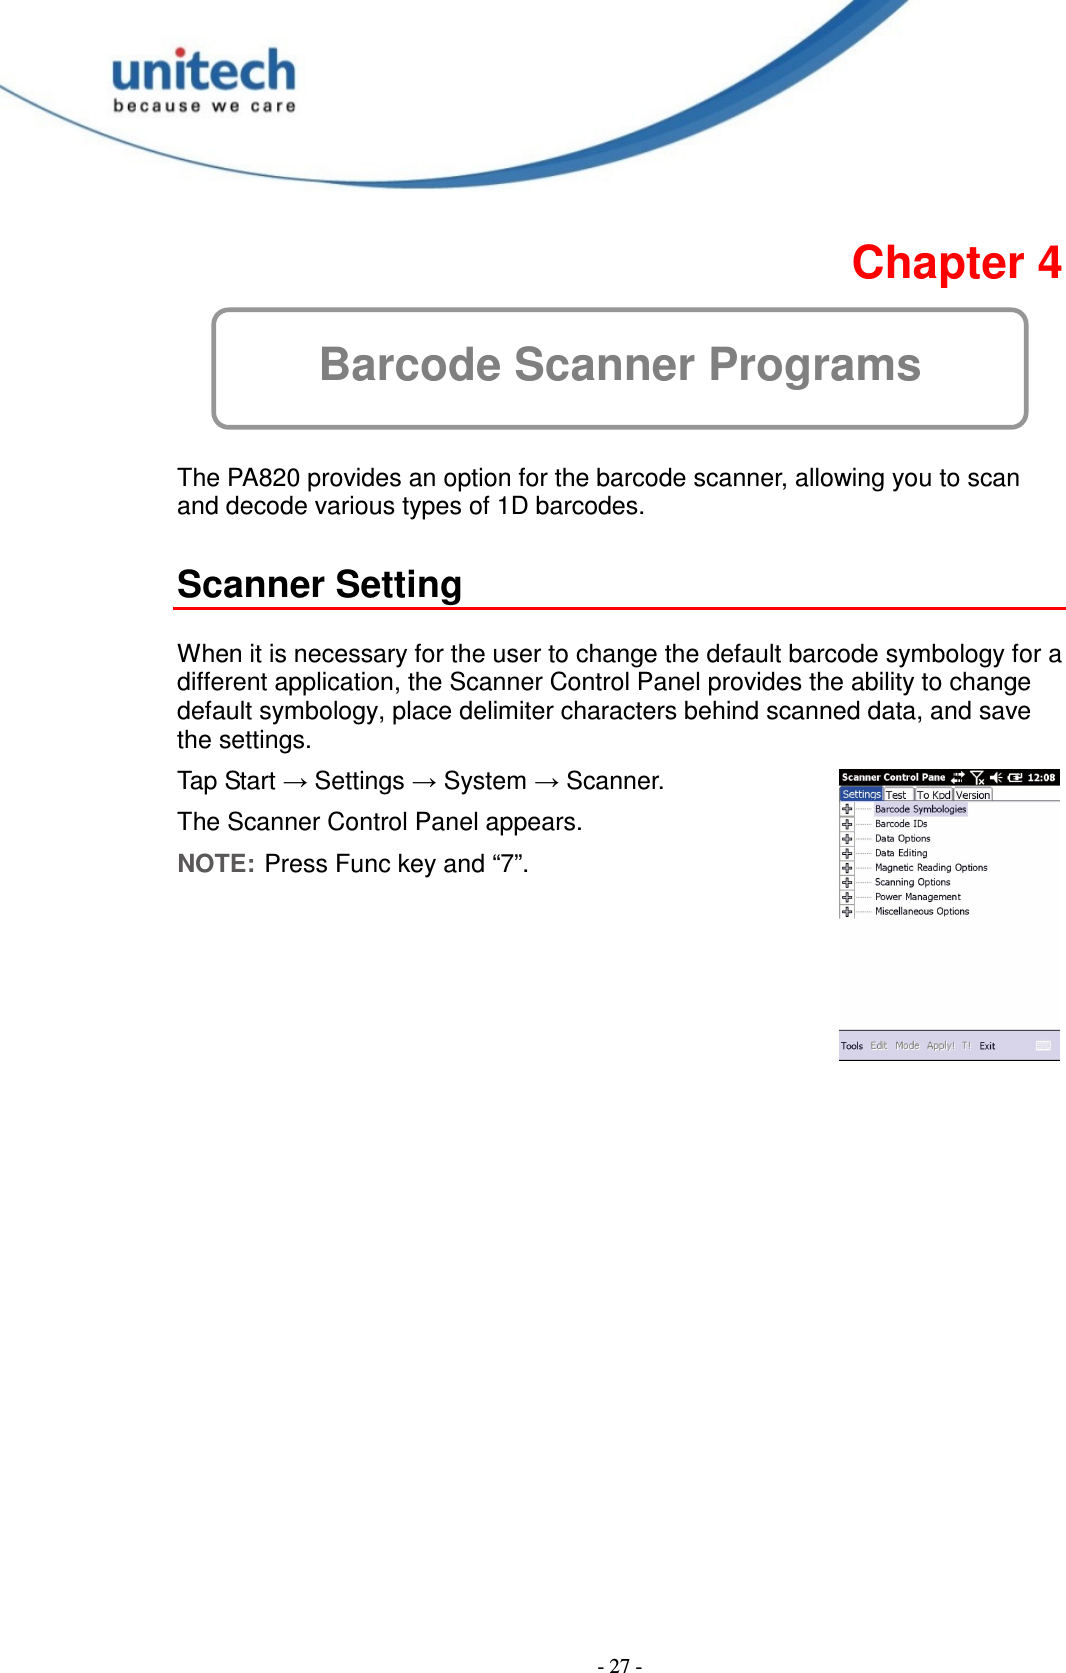  - 27 -  Chapter 4 Barcode Scanner Programs  The PA820 provides an option for the barcode scanner, allowing you to scan and decode various types of 1D barcodes.  Scanner Setting  When it is necessary for the user to change the default barcode symbology for a different application, the Scanner Control Panel provides the ability to change default symbology, place delimiter characters behind scanned data, and save the settings. Tap Start → Settings → System → Scanner. The Scanner Control Panel appears. NOTE: Press Func key and “7”. 